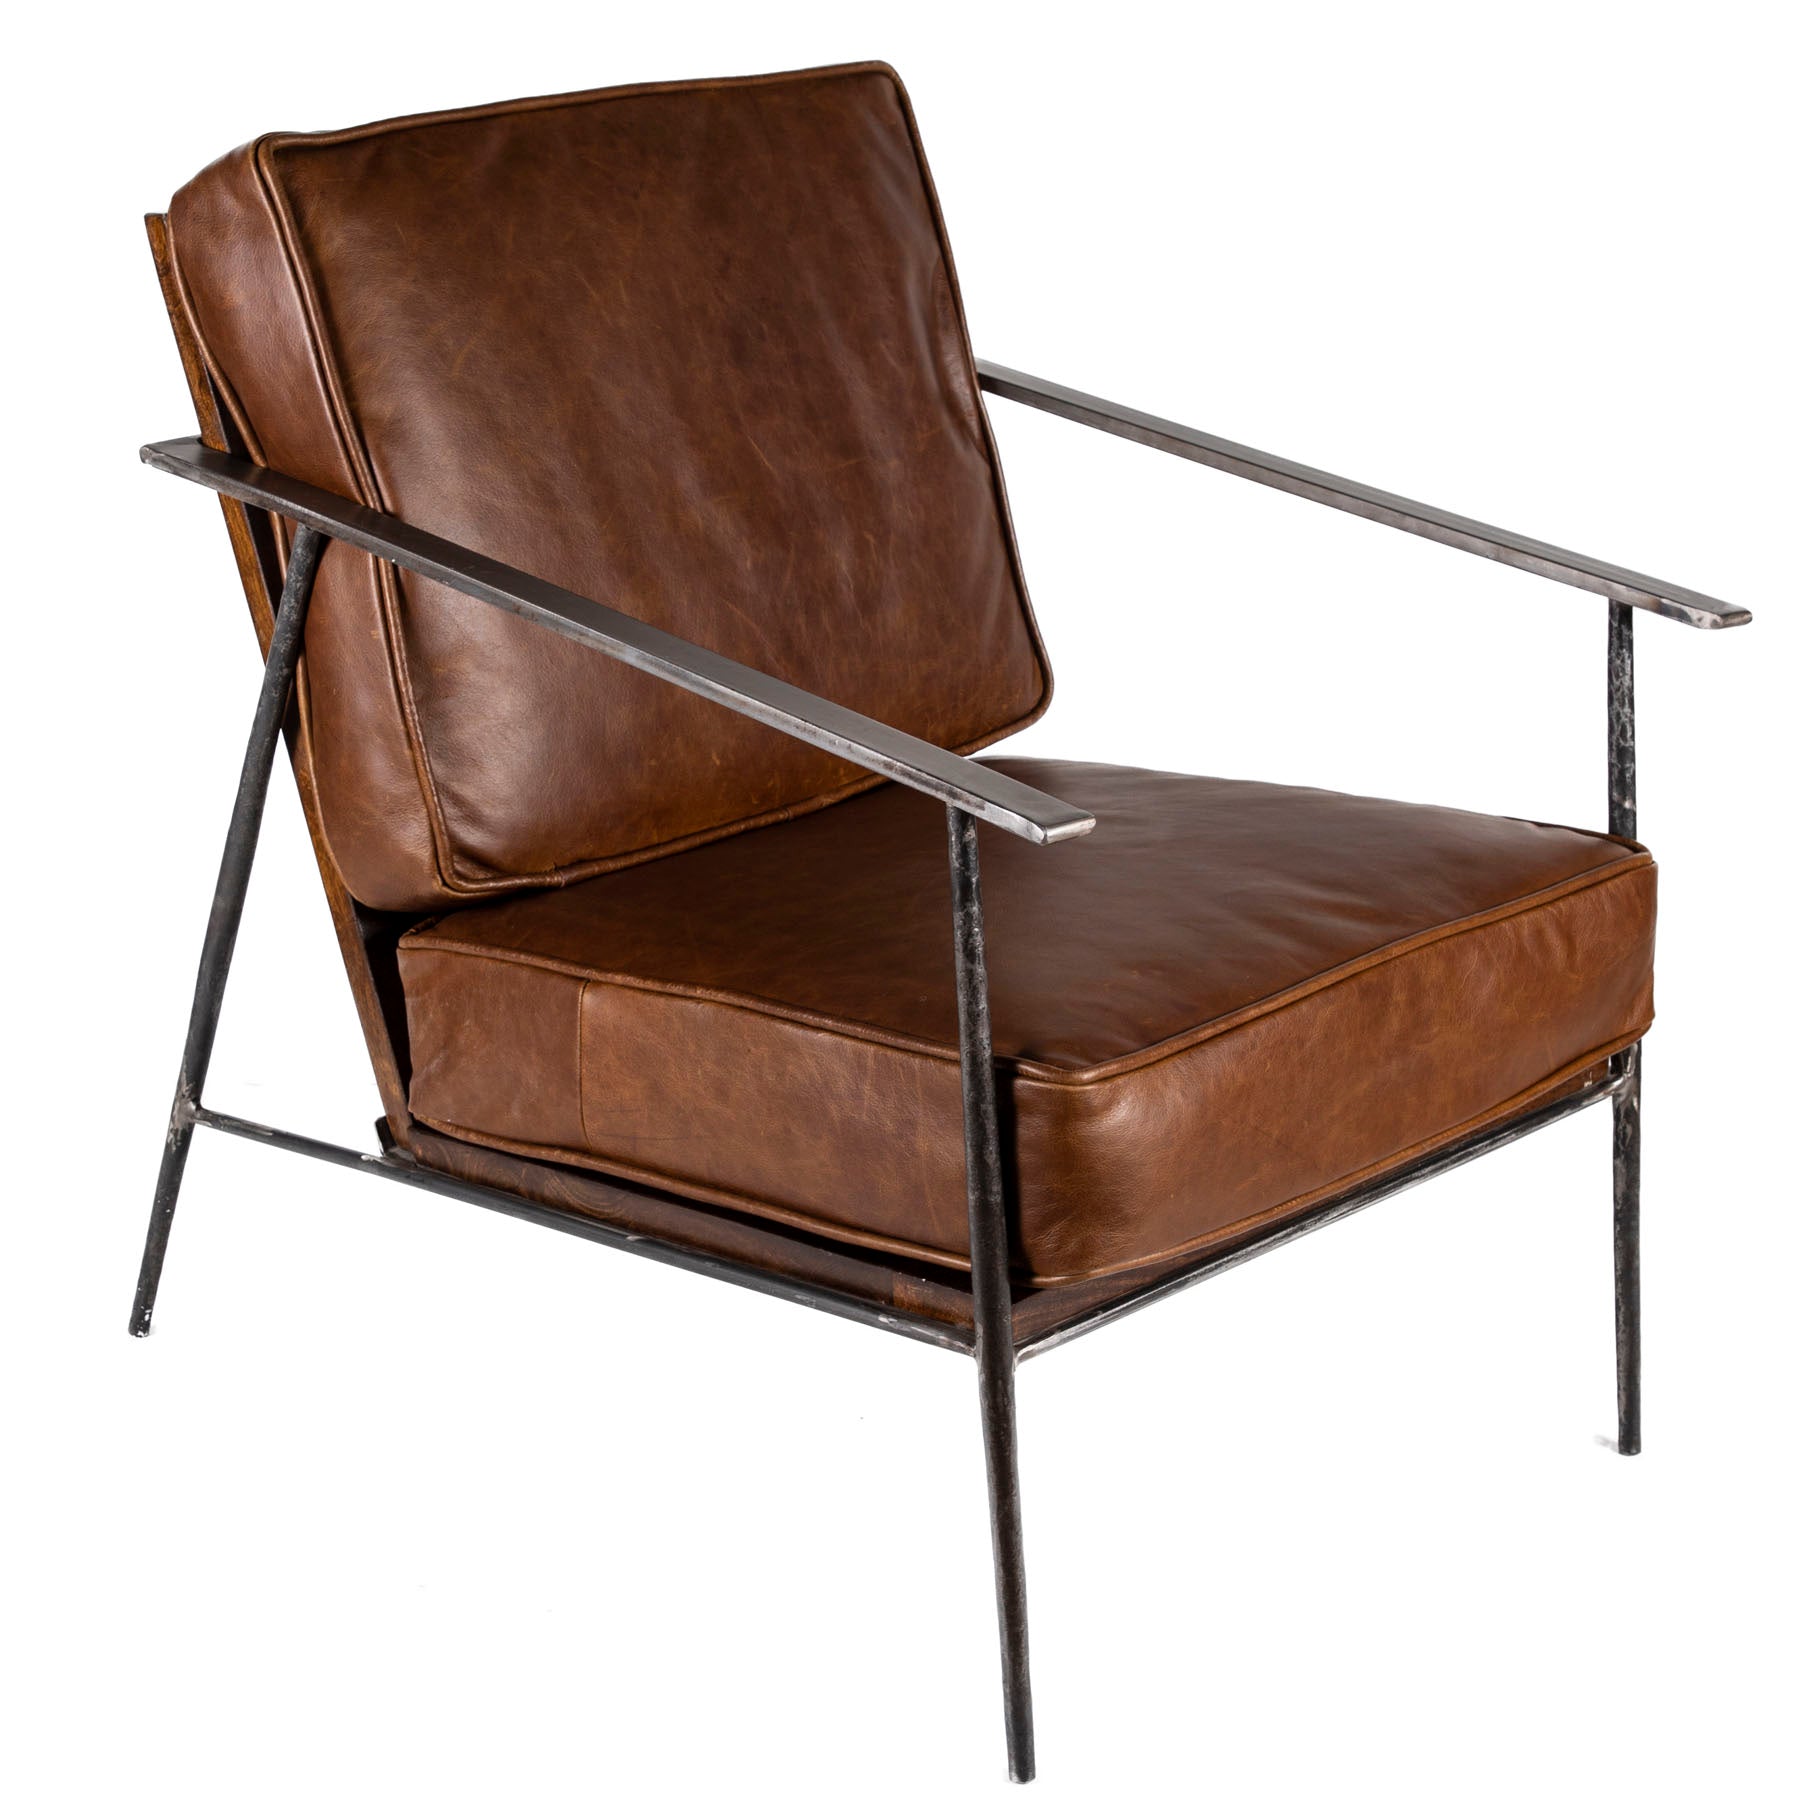 Fountain Leather Accent Chair - MJM Furniture